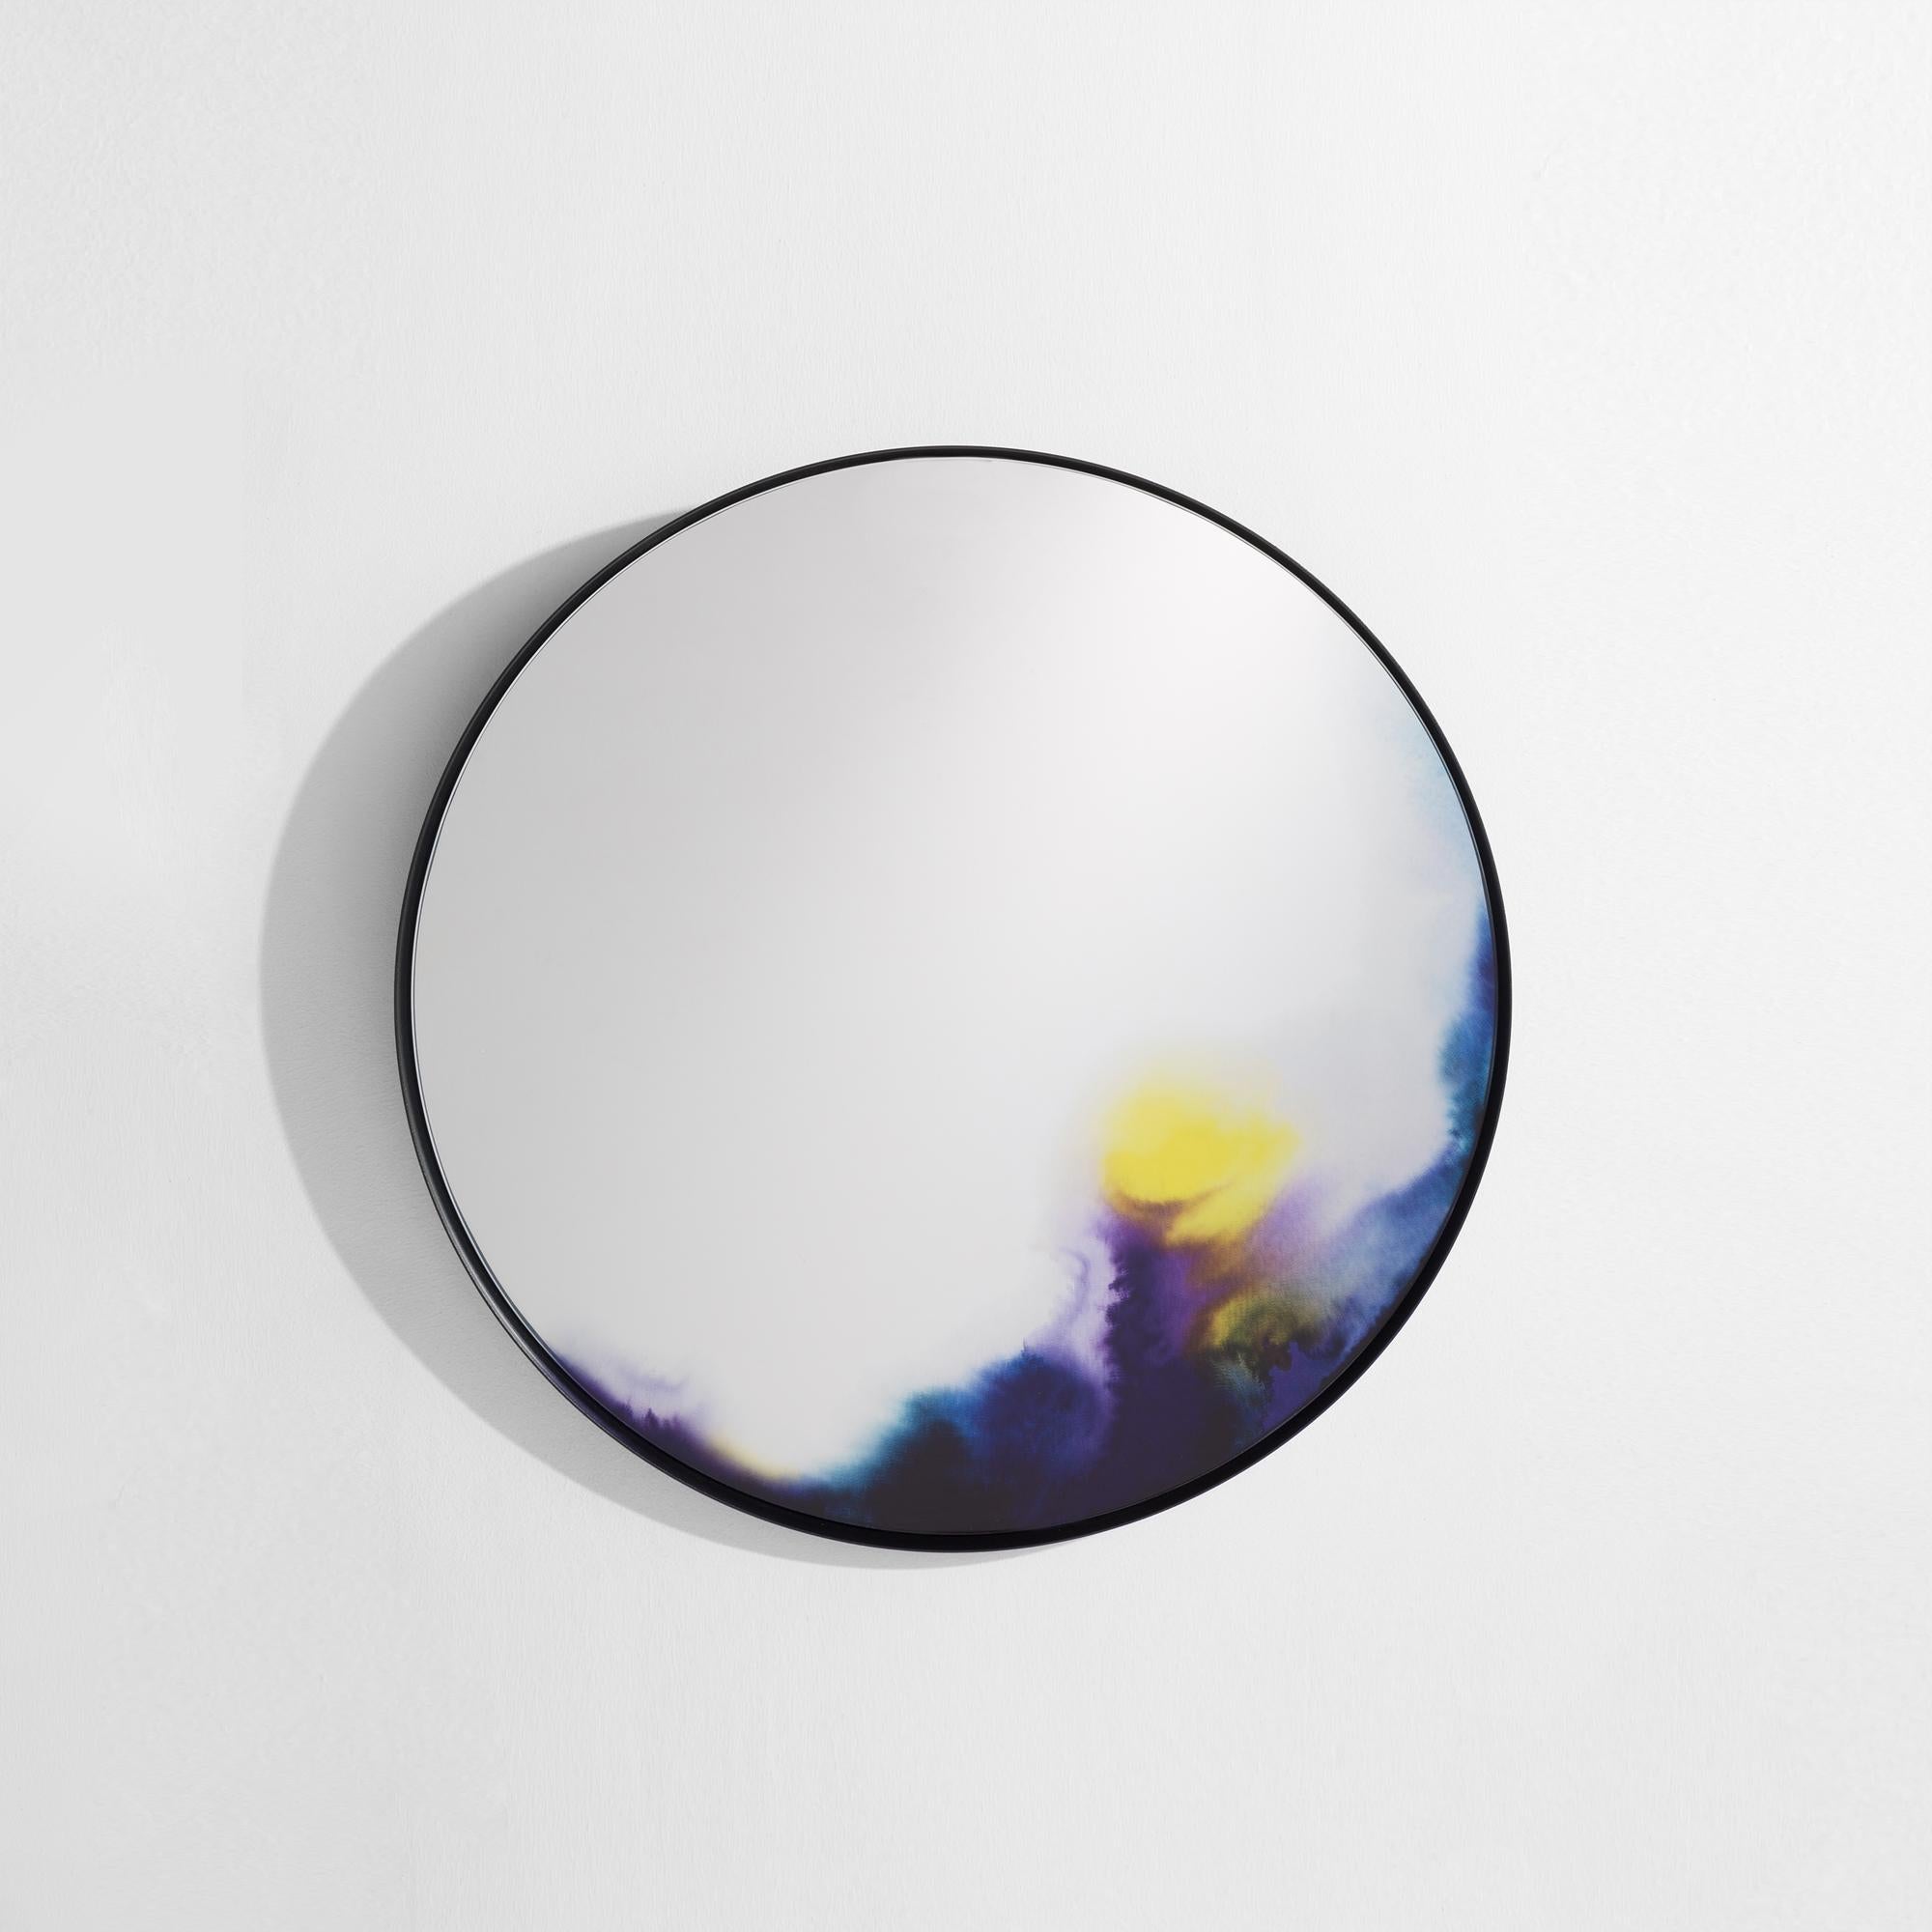 Petite Friture Large Francis Wall Mirror in Black and Blue Watercolor  In New Condition For Sale In Brooklyn, NY